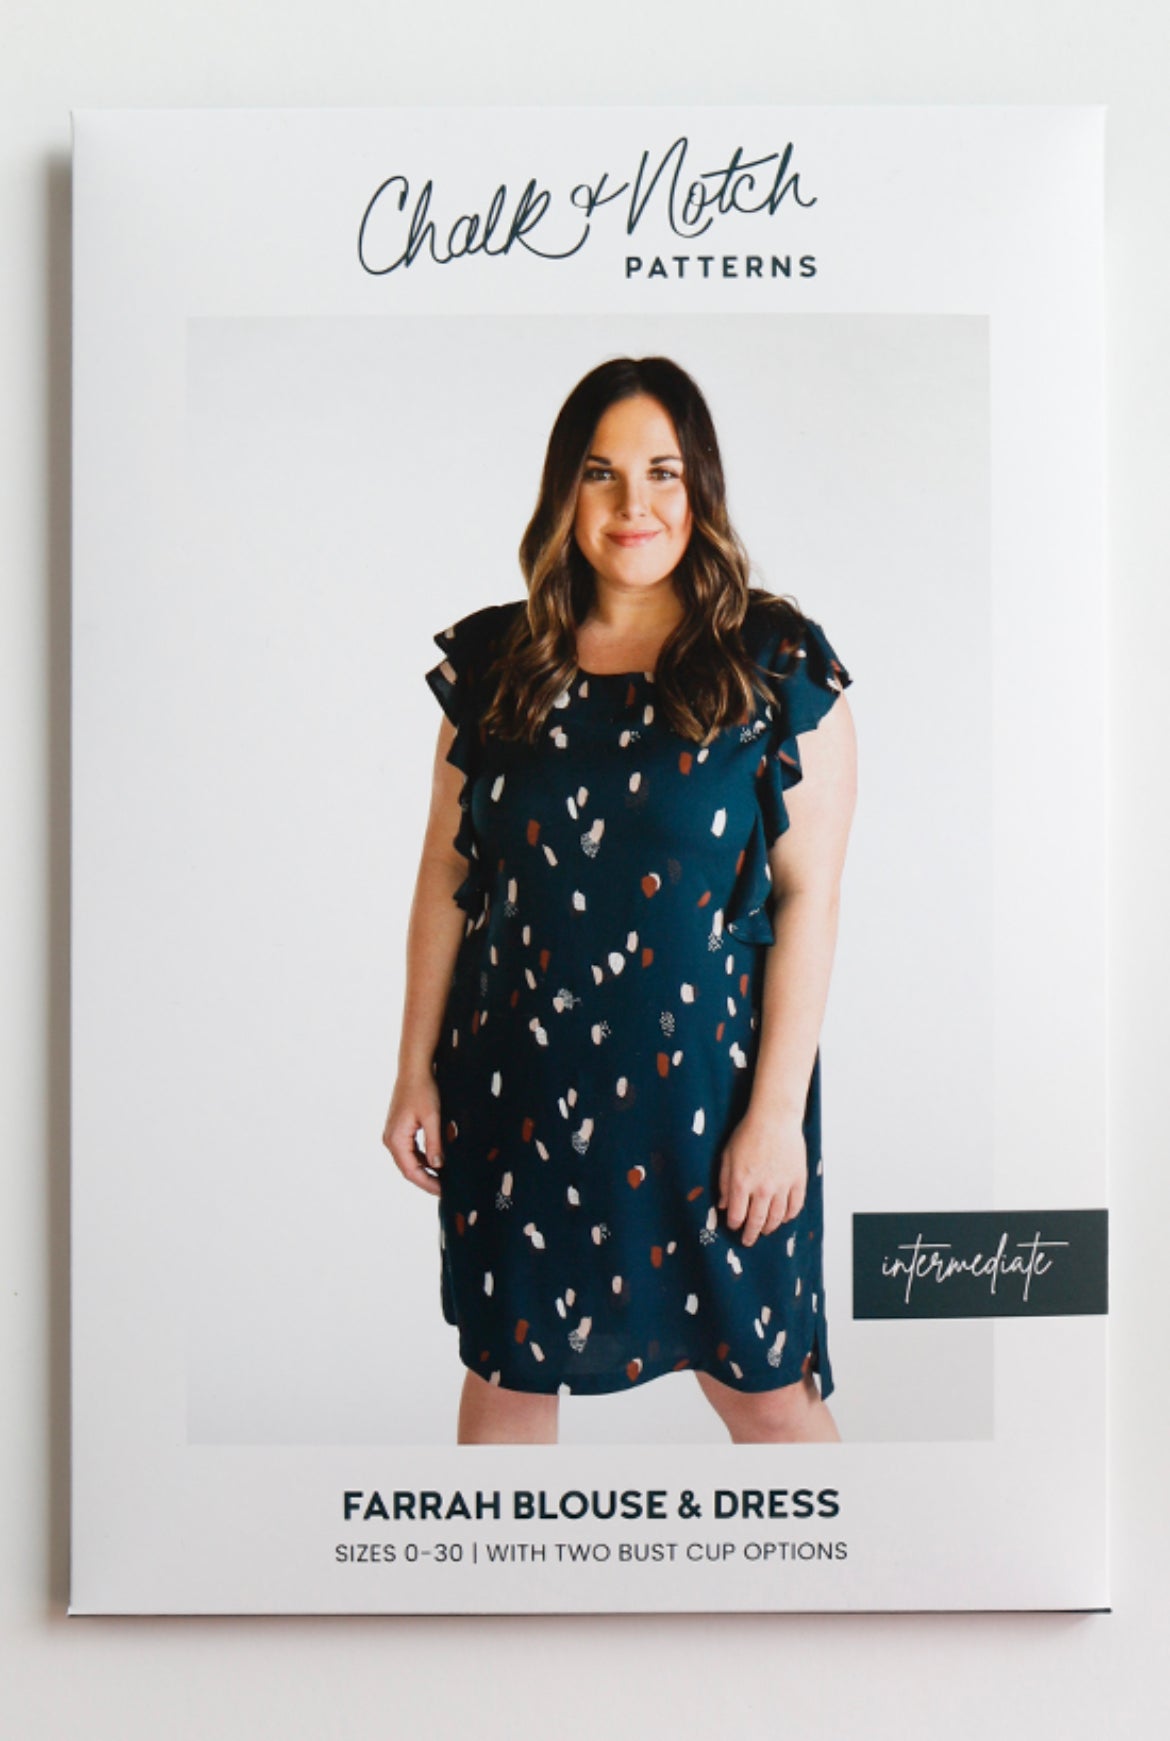 Chalk and Notch - Farrah Blouse and Dress Sewing Pattern